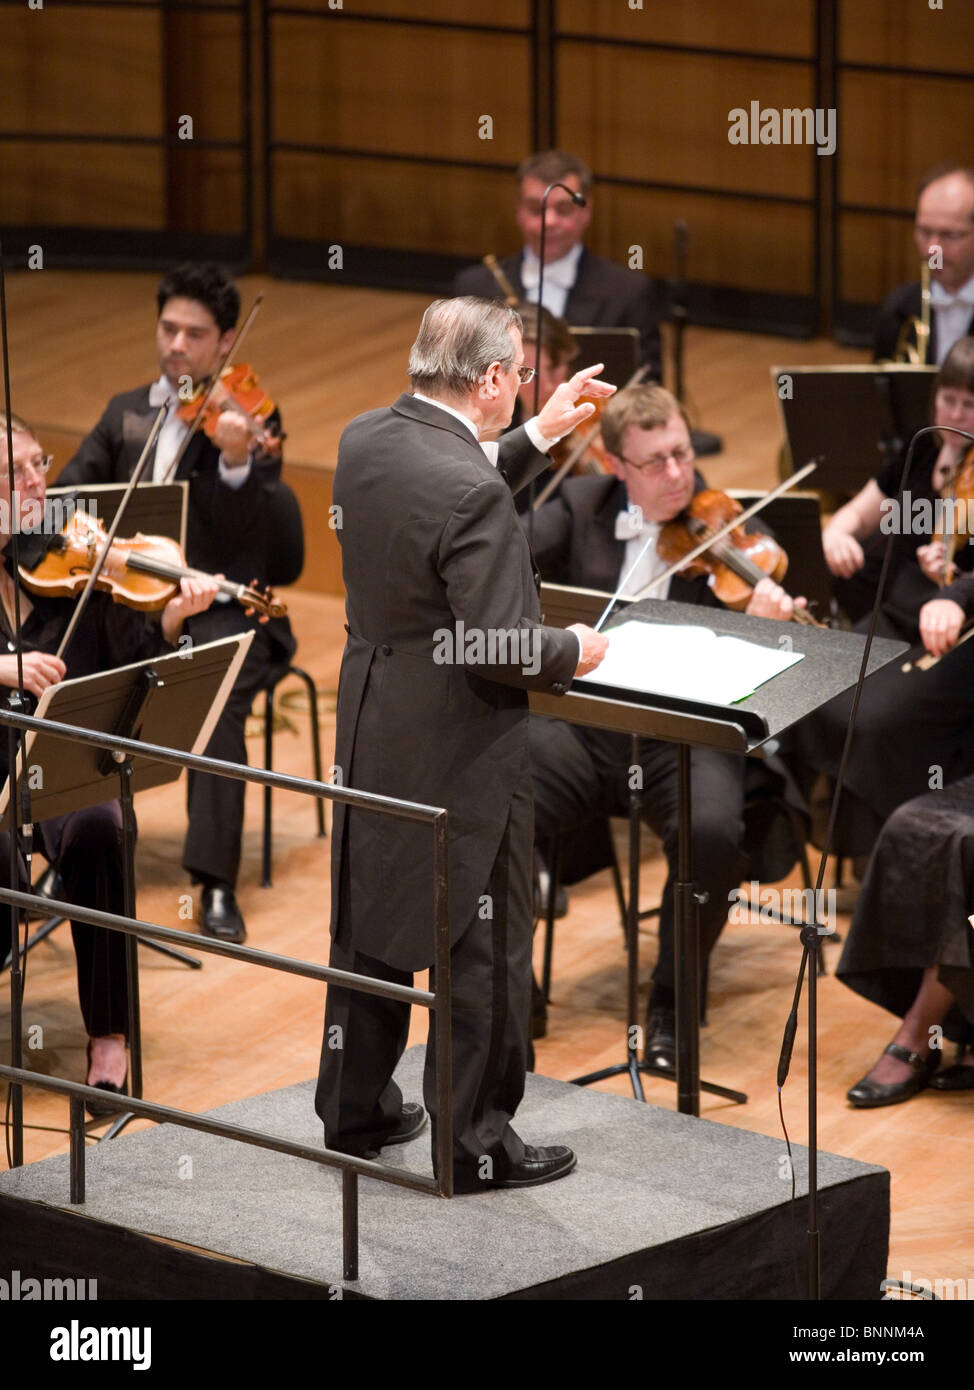 Members of the Anima Eterna Philharmonic Orchestra perform on stage at MUPA, Conductor: Jos van Immerseel on April 27, 2010 Stock Photo